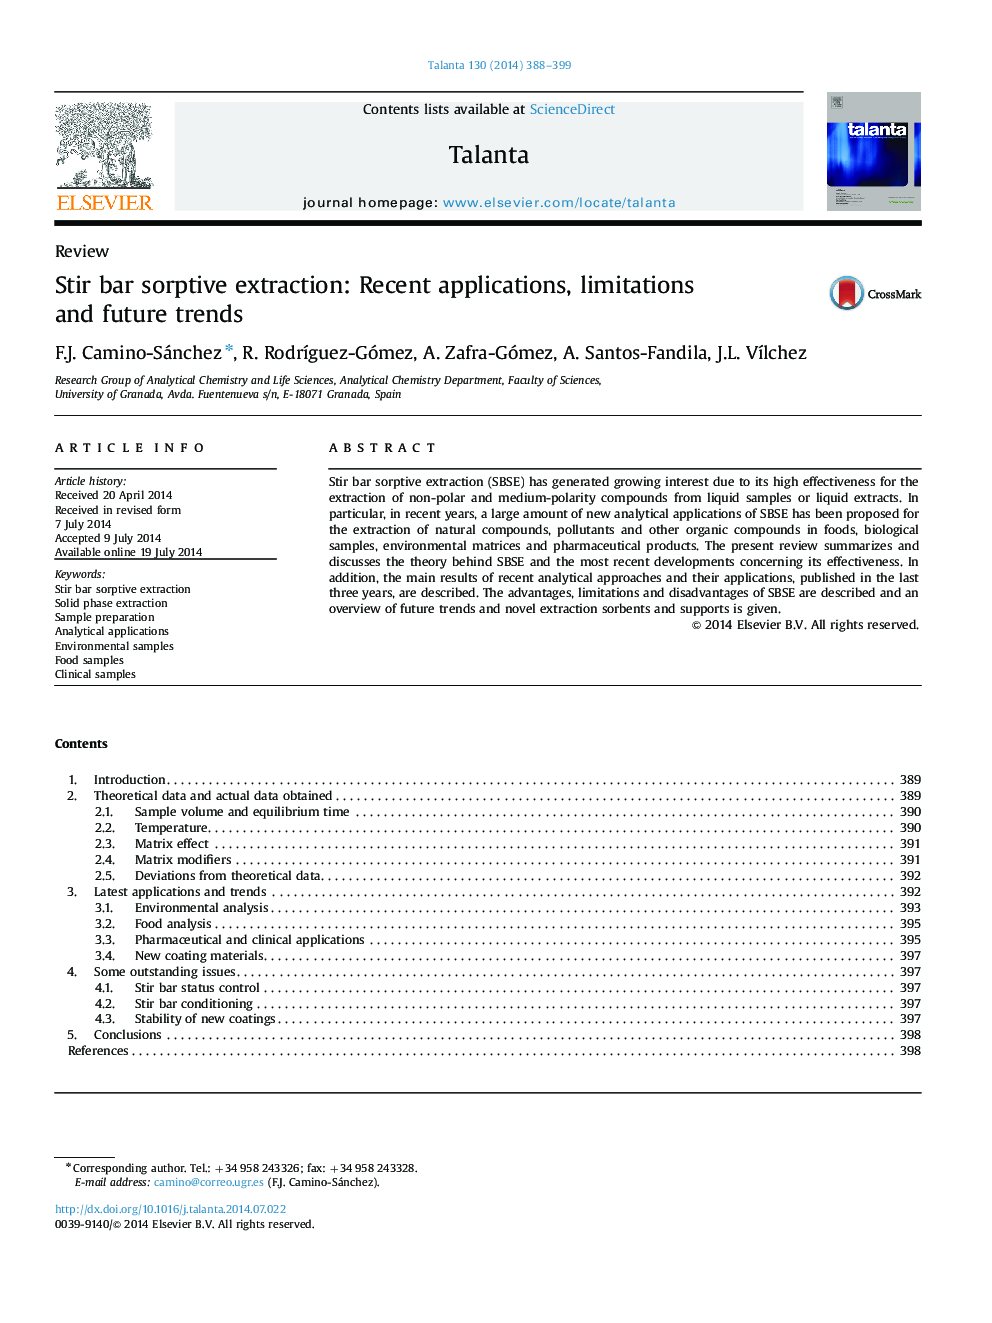 Stir bar sorptive extraction: Recent applications, limitations and future trends